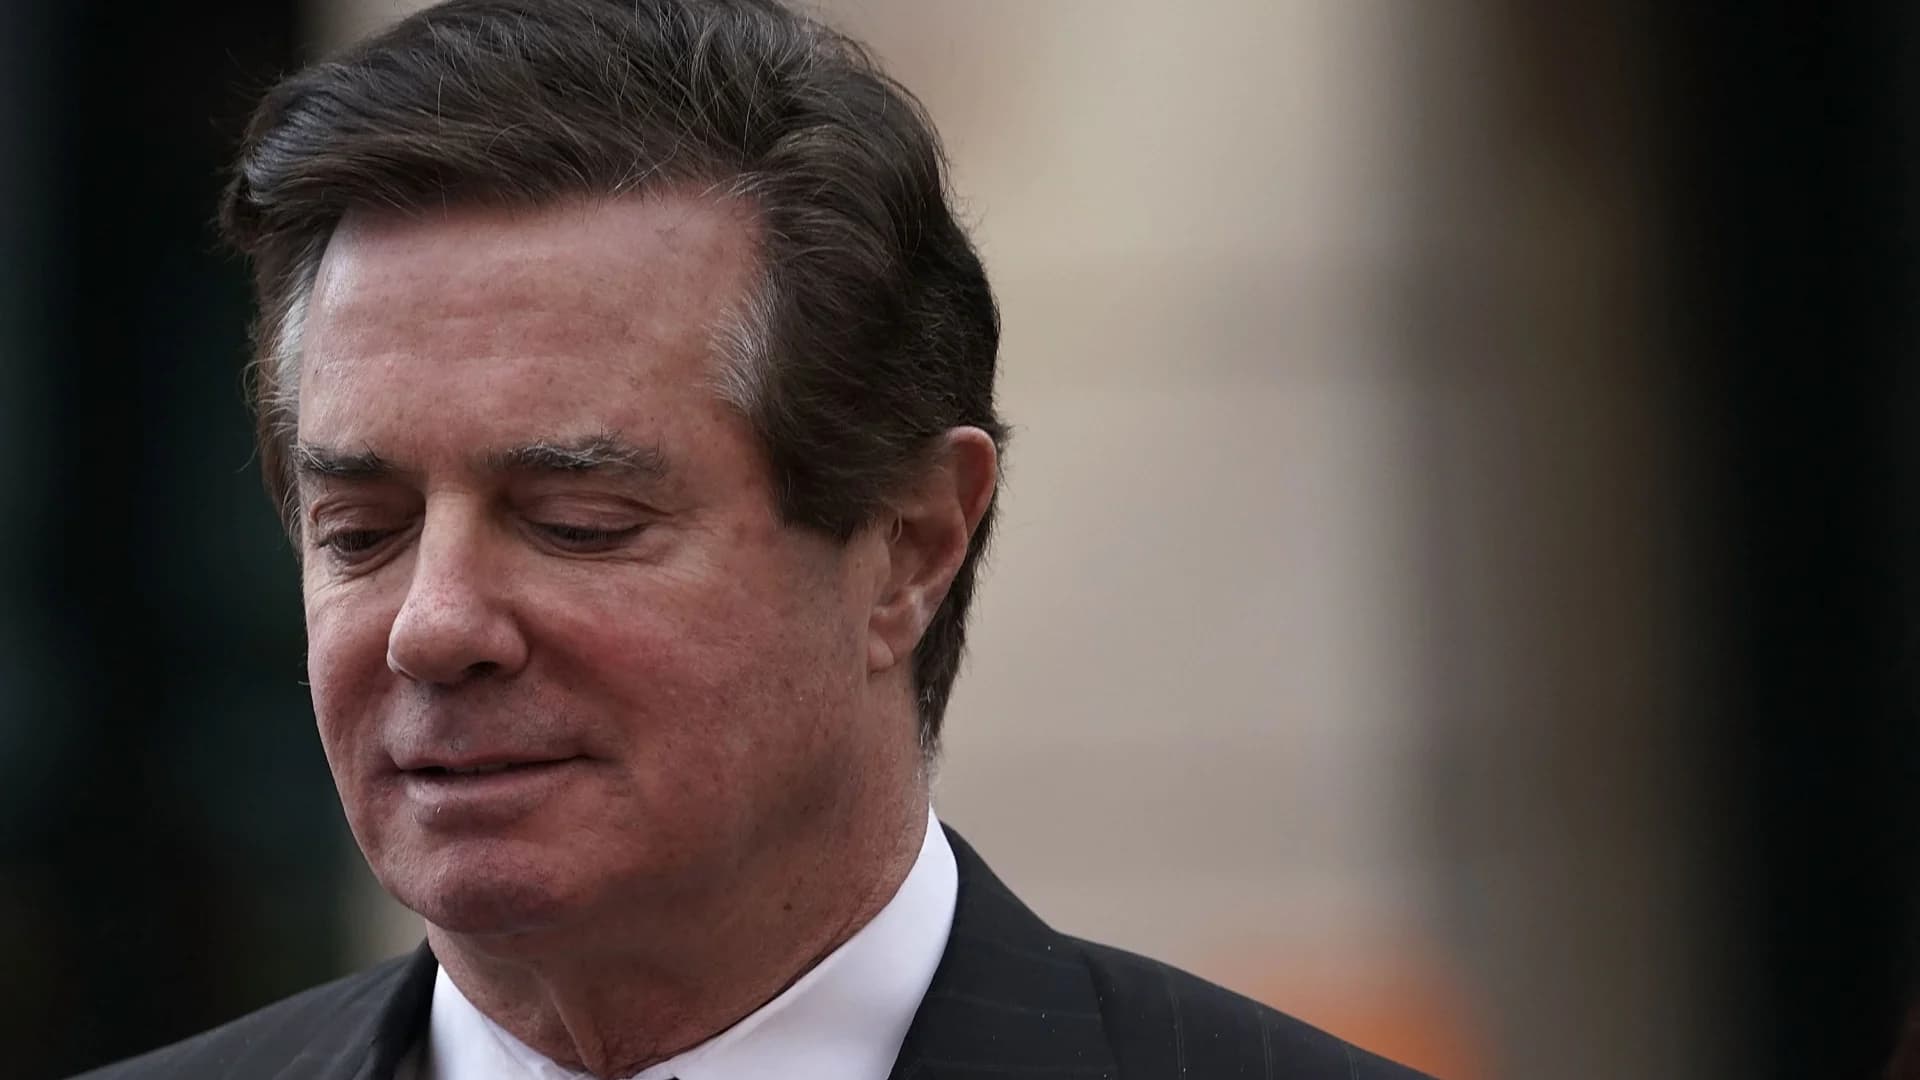 New charges filed against Manafort in Russia probe